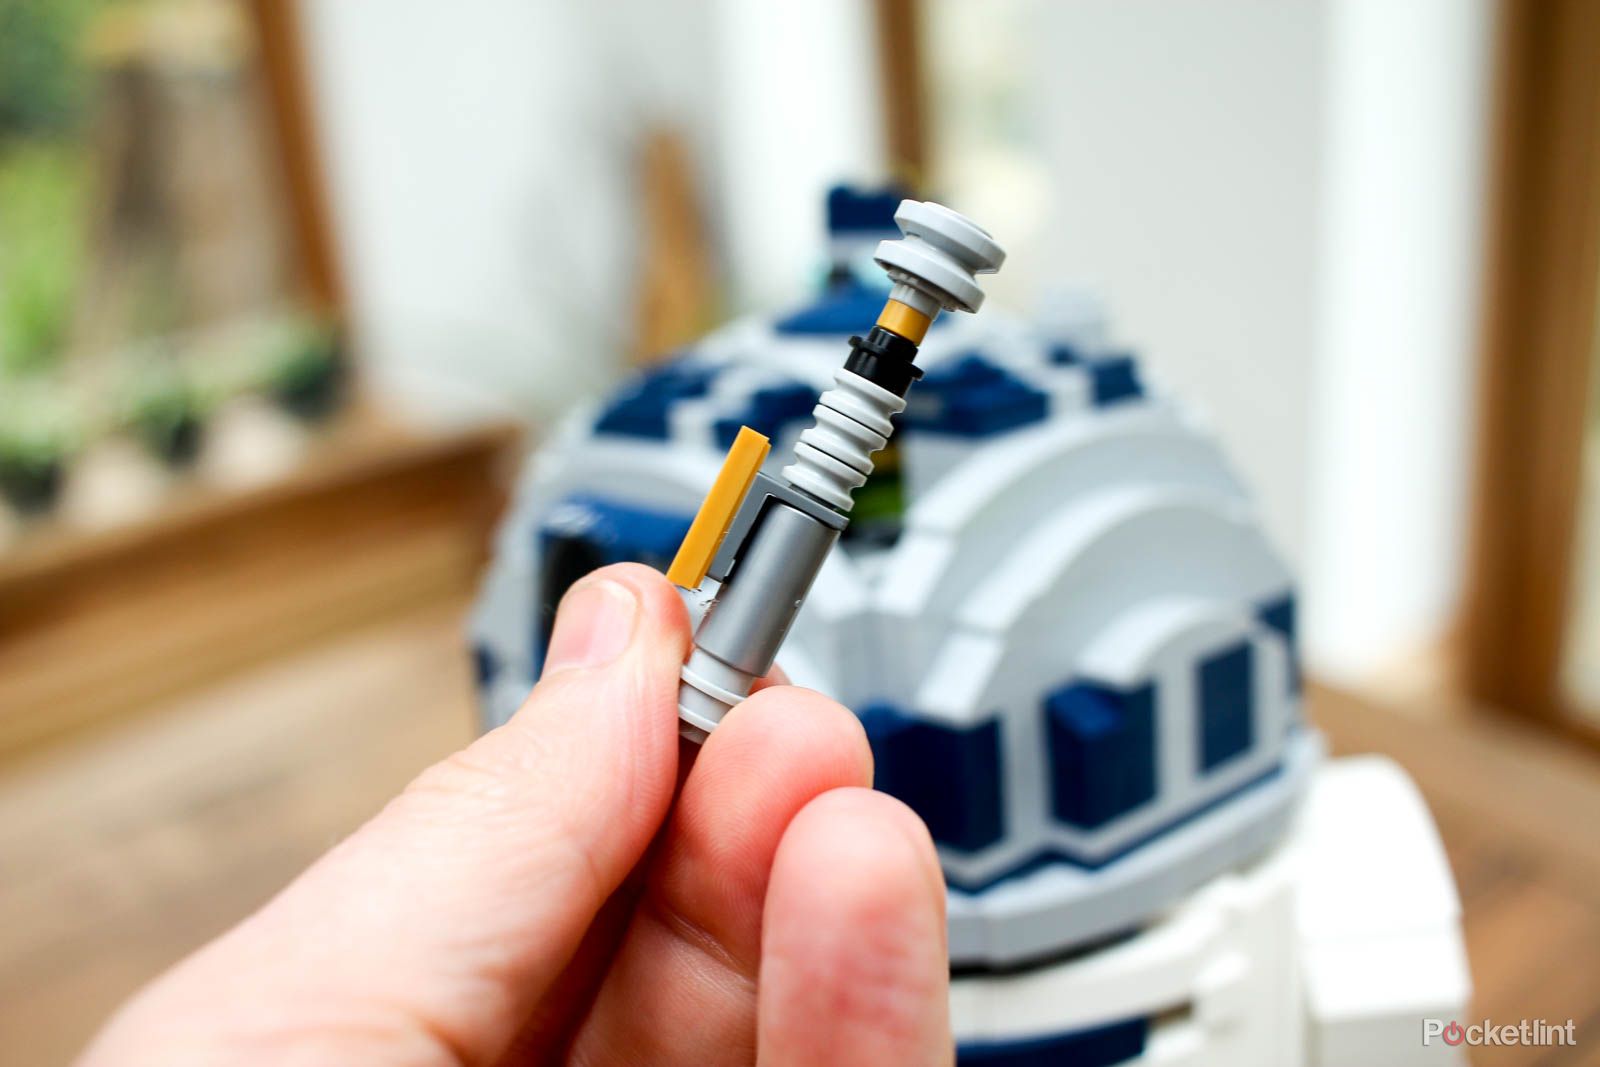 Lego R2-D2 hands on build pictures photo 13